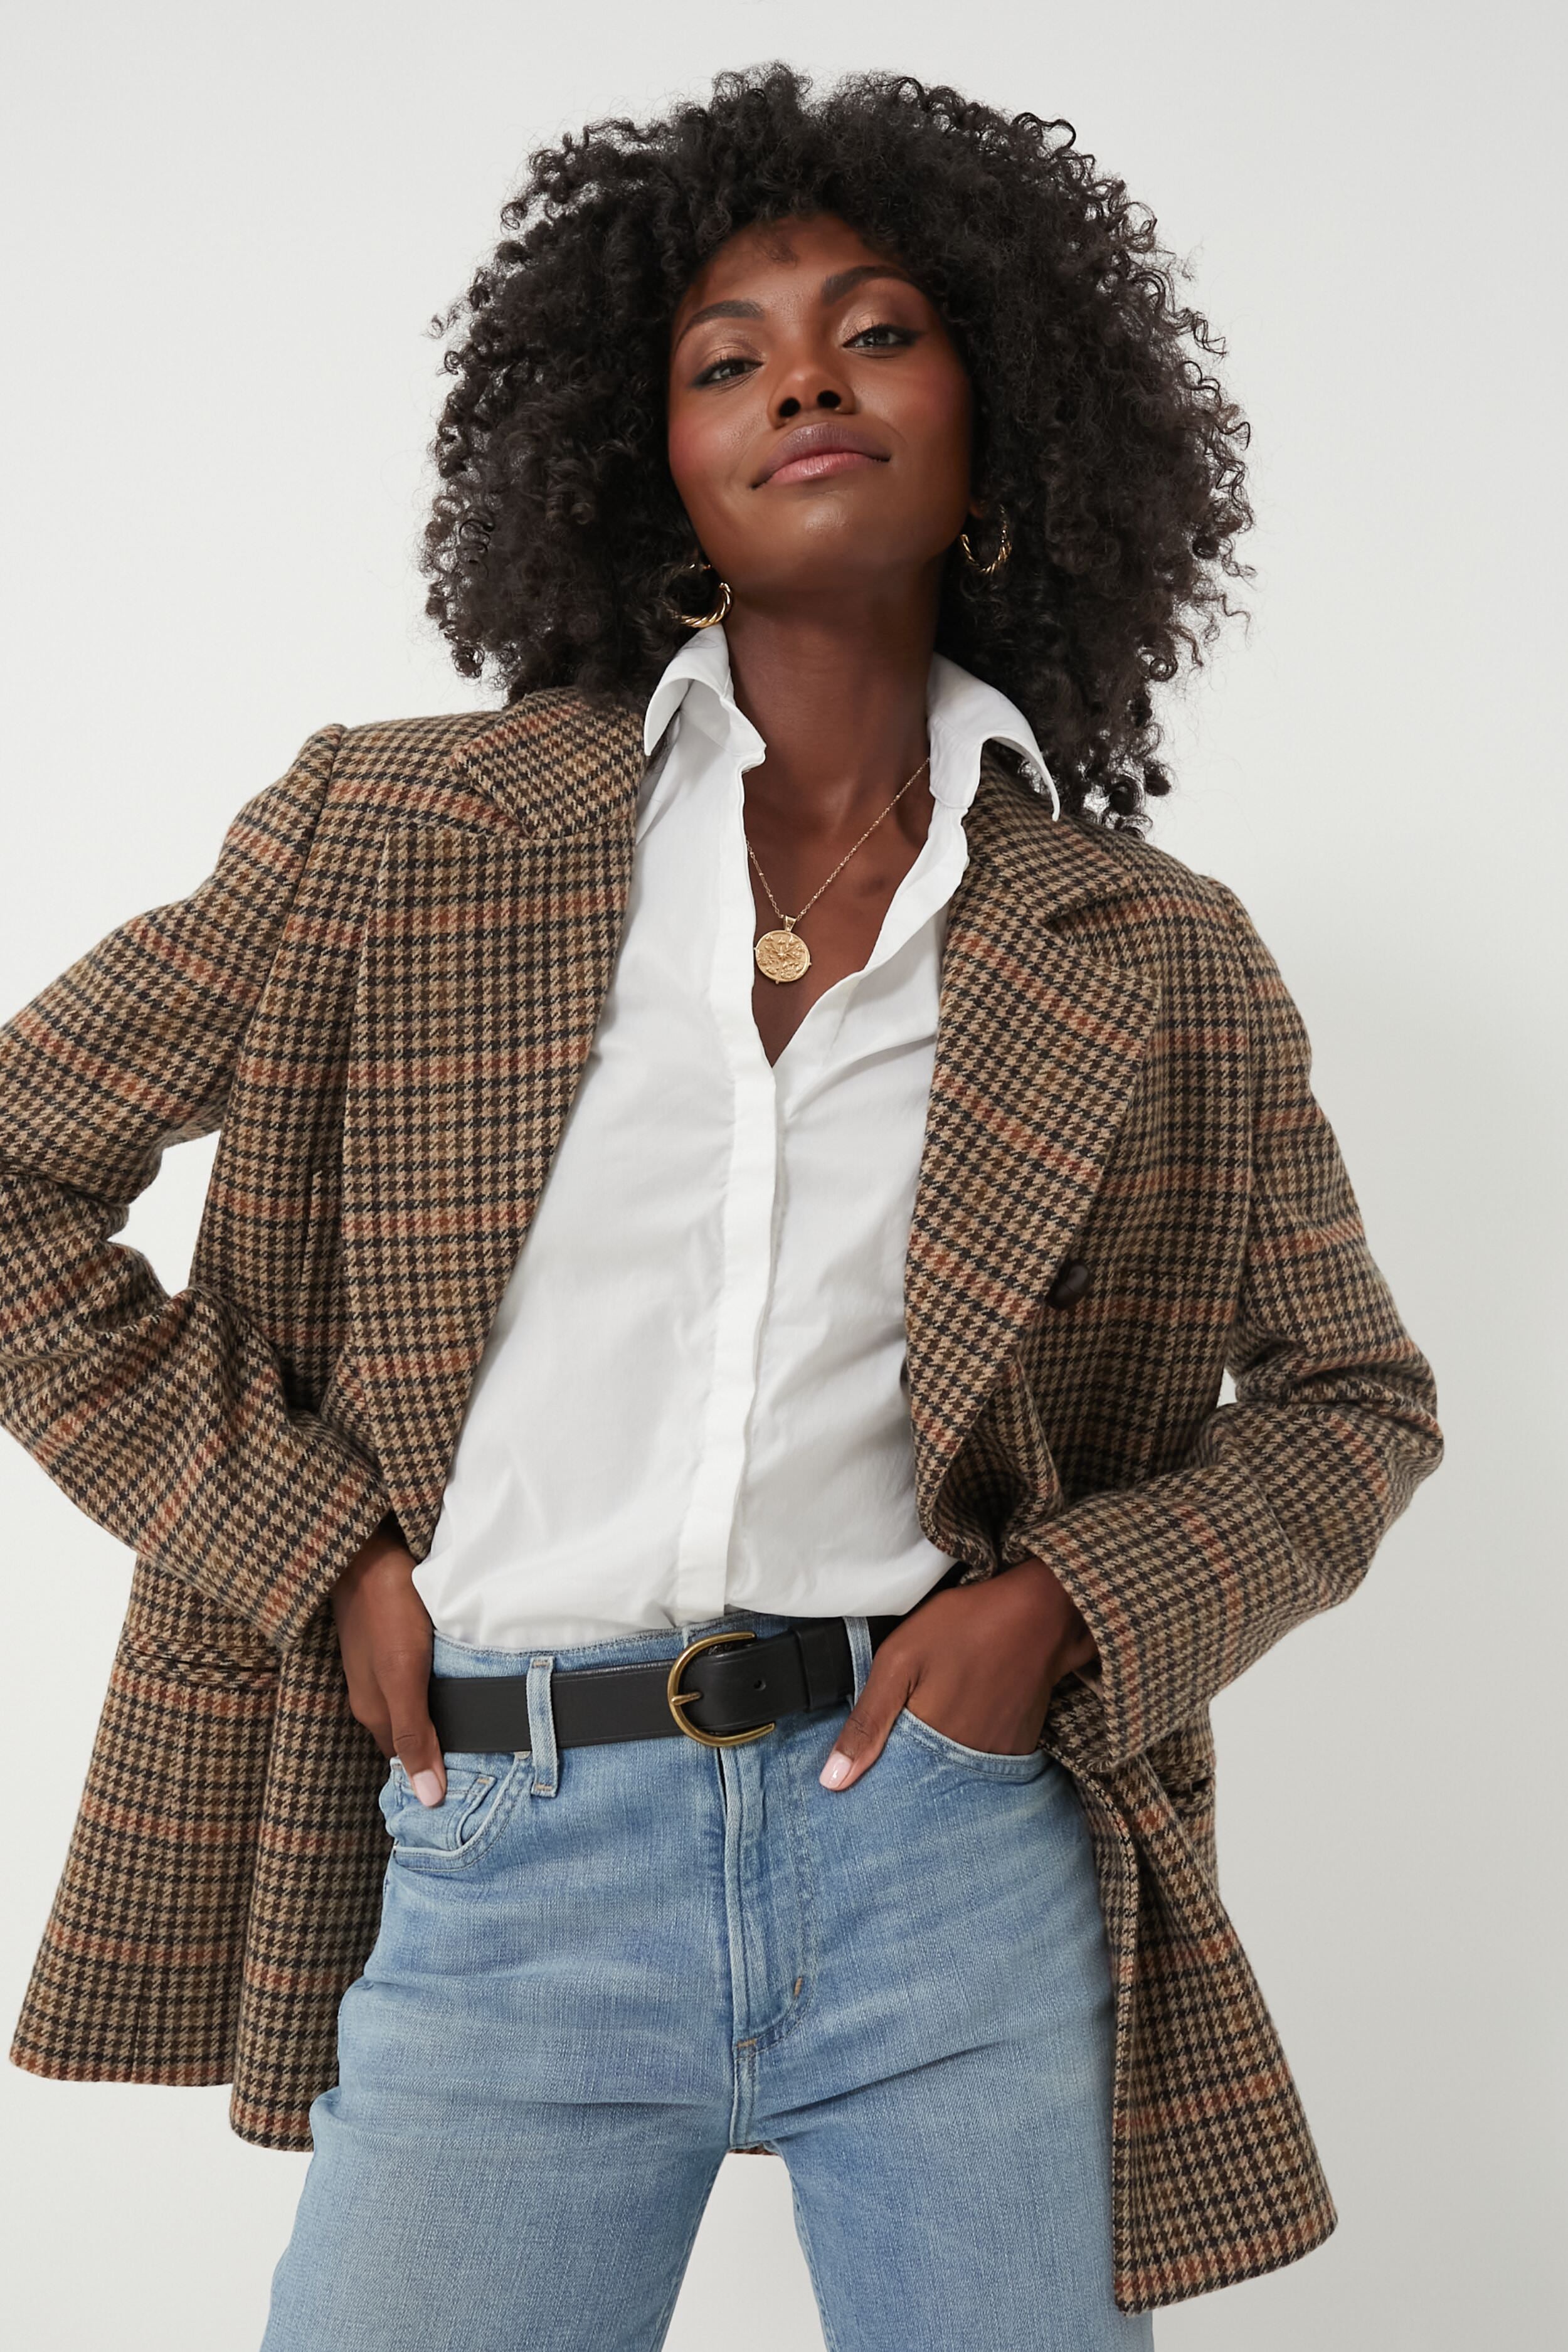 The 50s bouclé jacket is back — here's how to wear it now